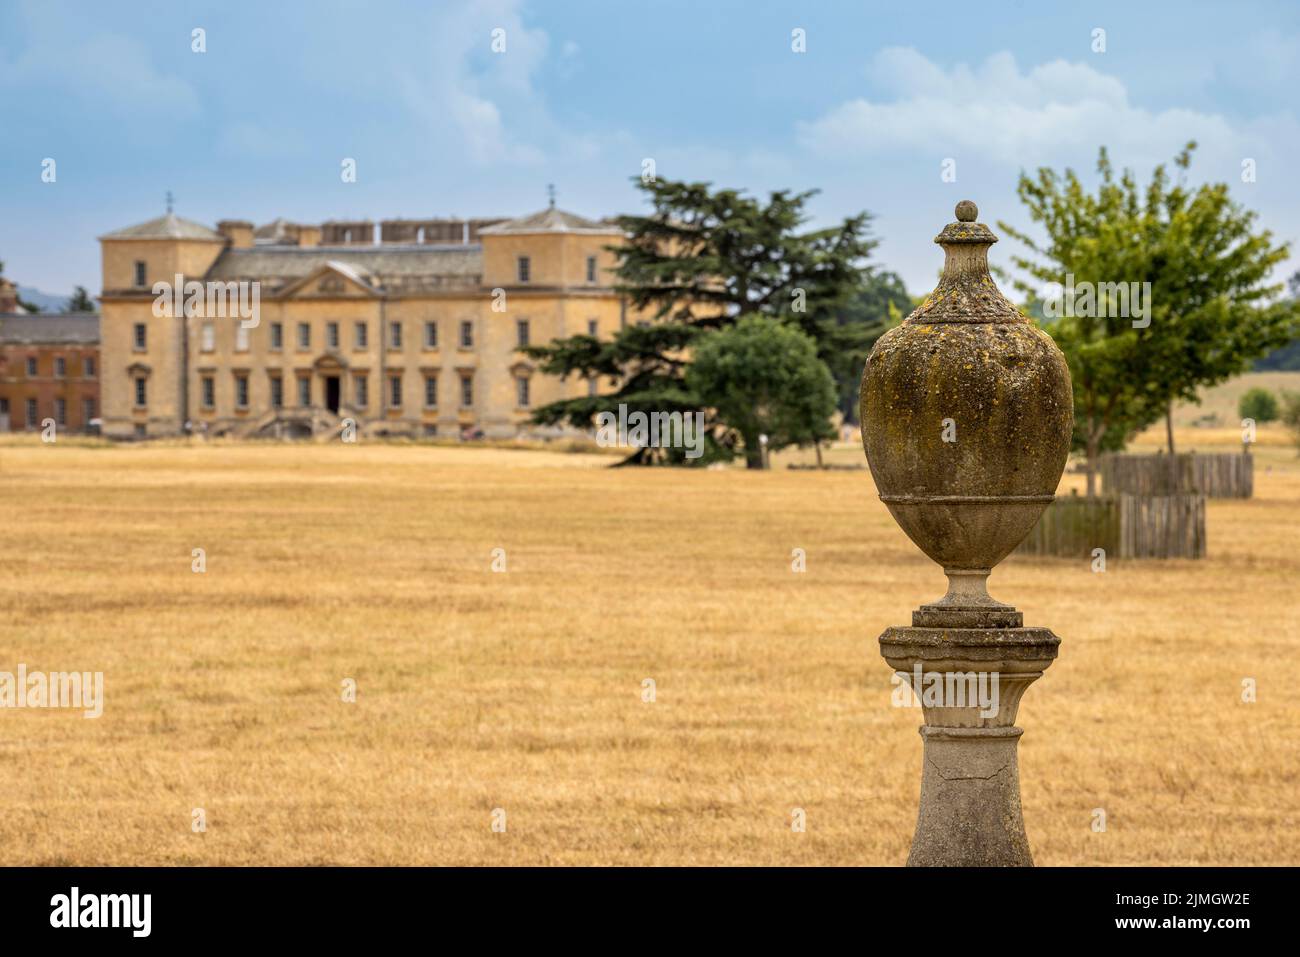 Ornamental stonework at Croome Court, Worcestershire, England Stock Photo